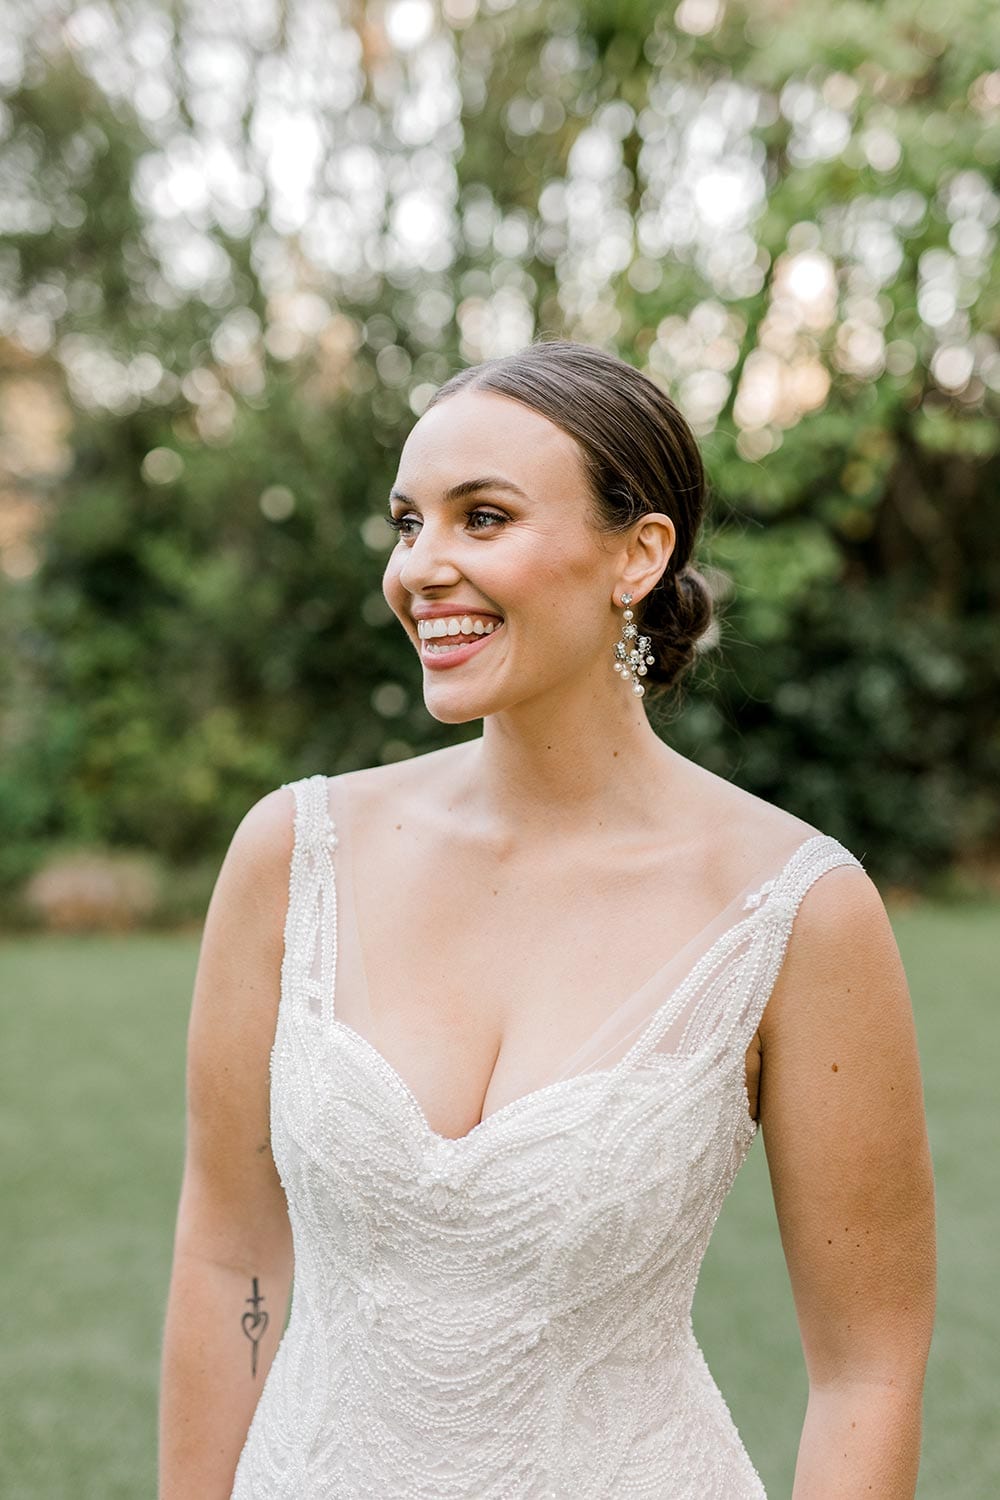 Juliette Wedding Dress from Vinka Design. Flattering stretch fitted lace wedding dress with beautiful ivory rich beading. Structured bodice provides support while remaining effortless to wear. Close up of structured bodice with neckline. Photographed at Tui Hills.